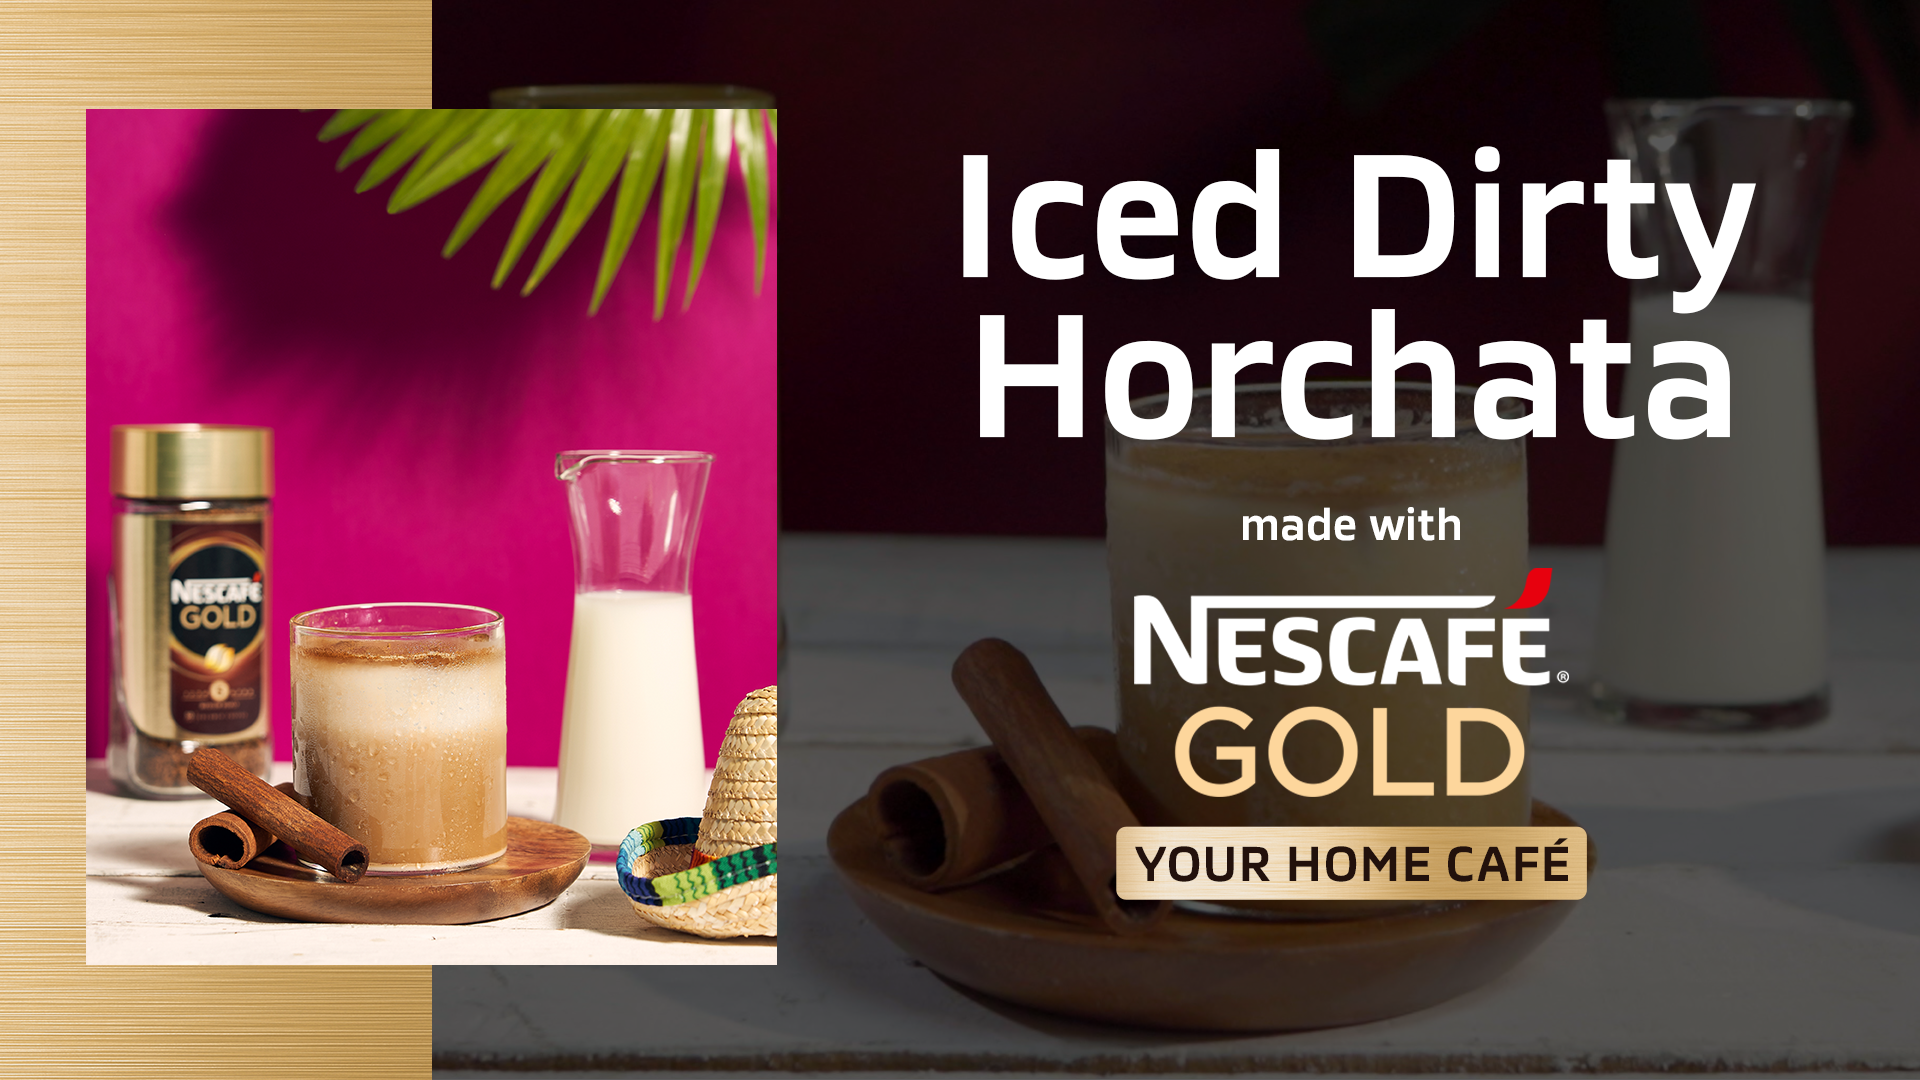 Iced Dirty Horchata recipe